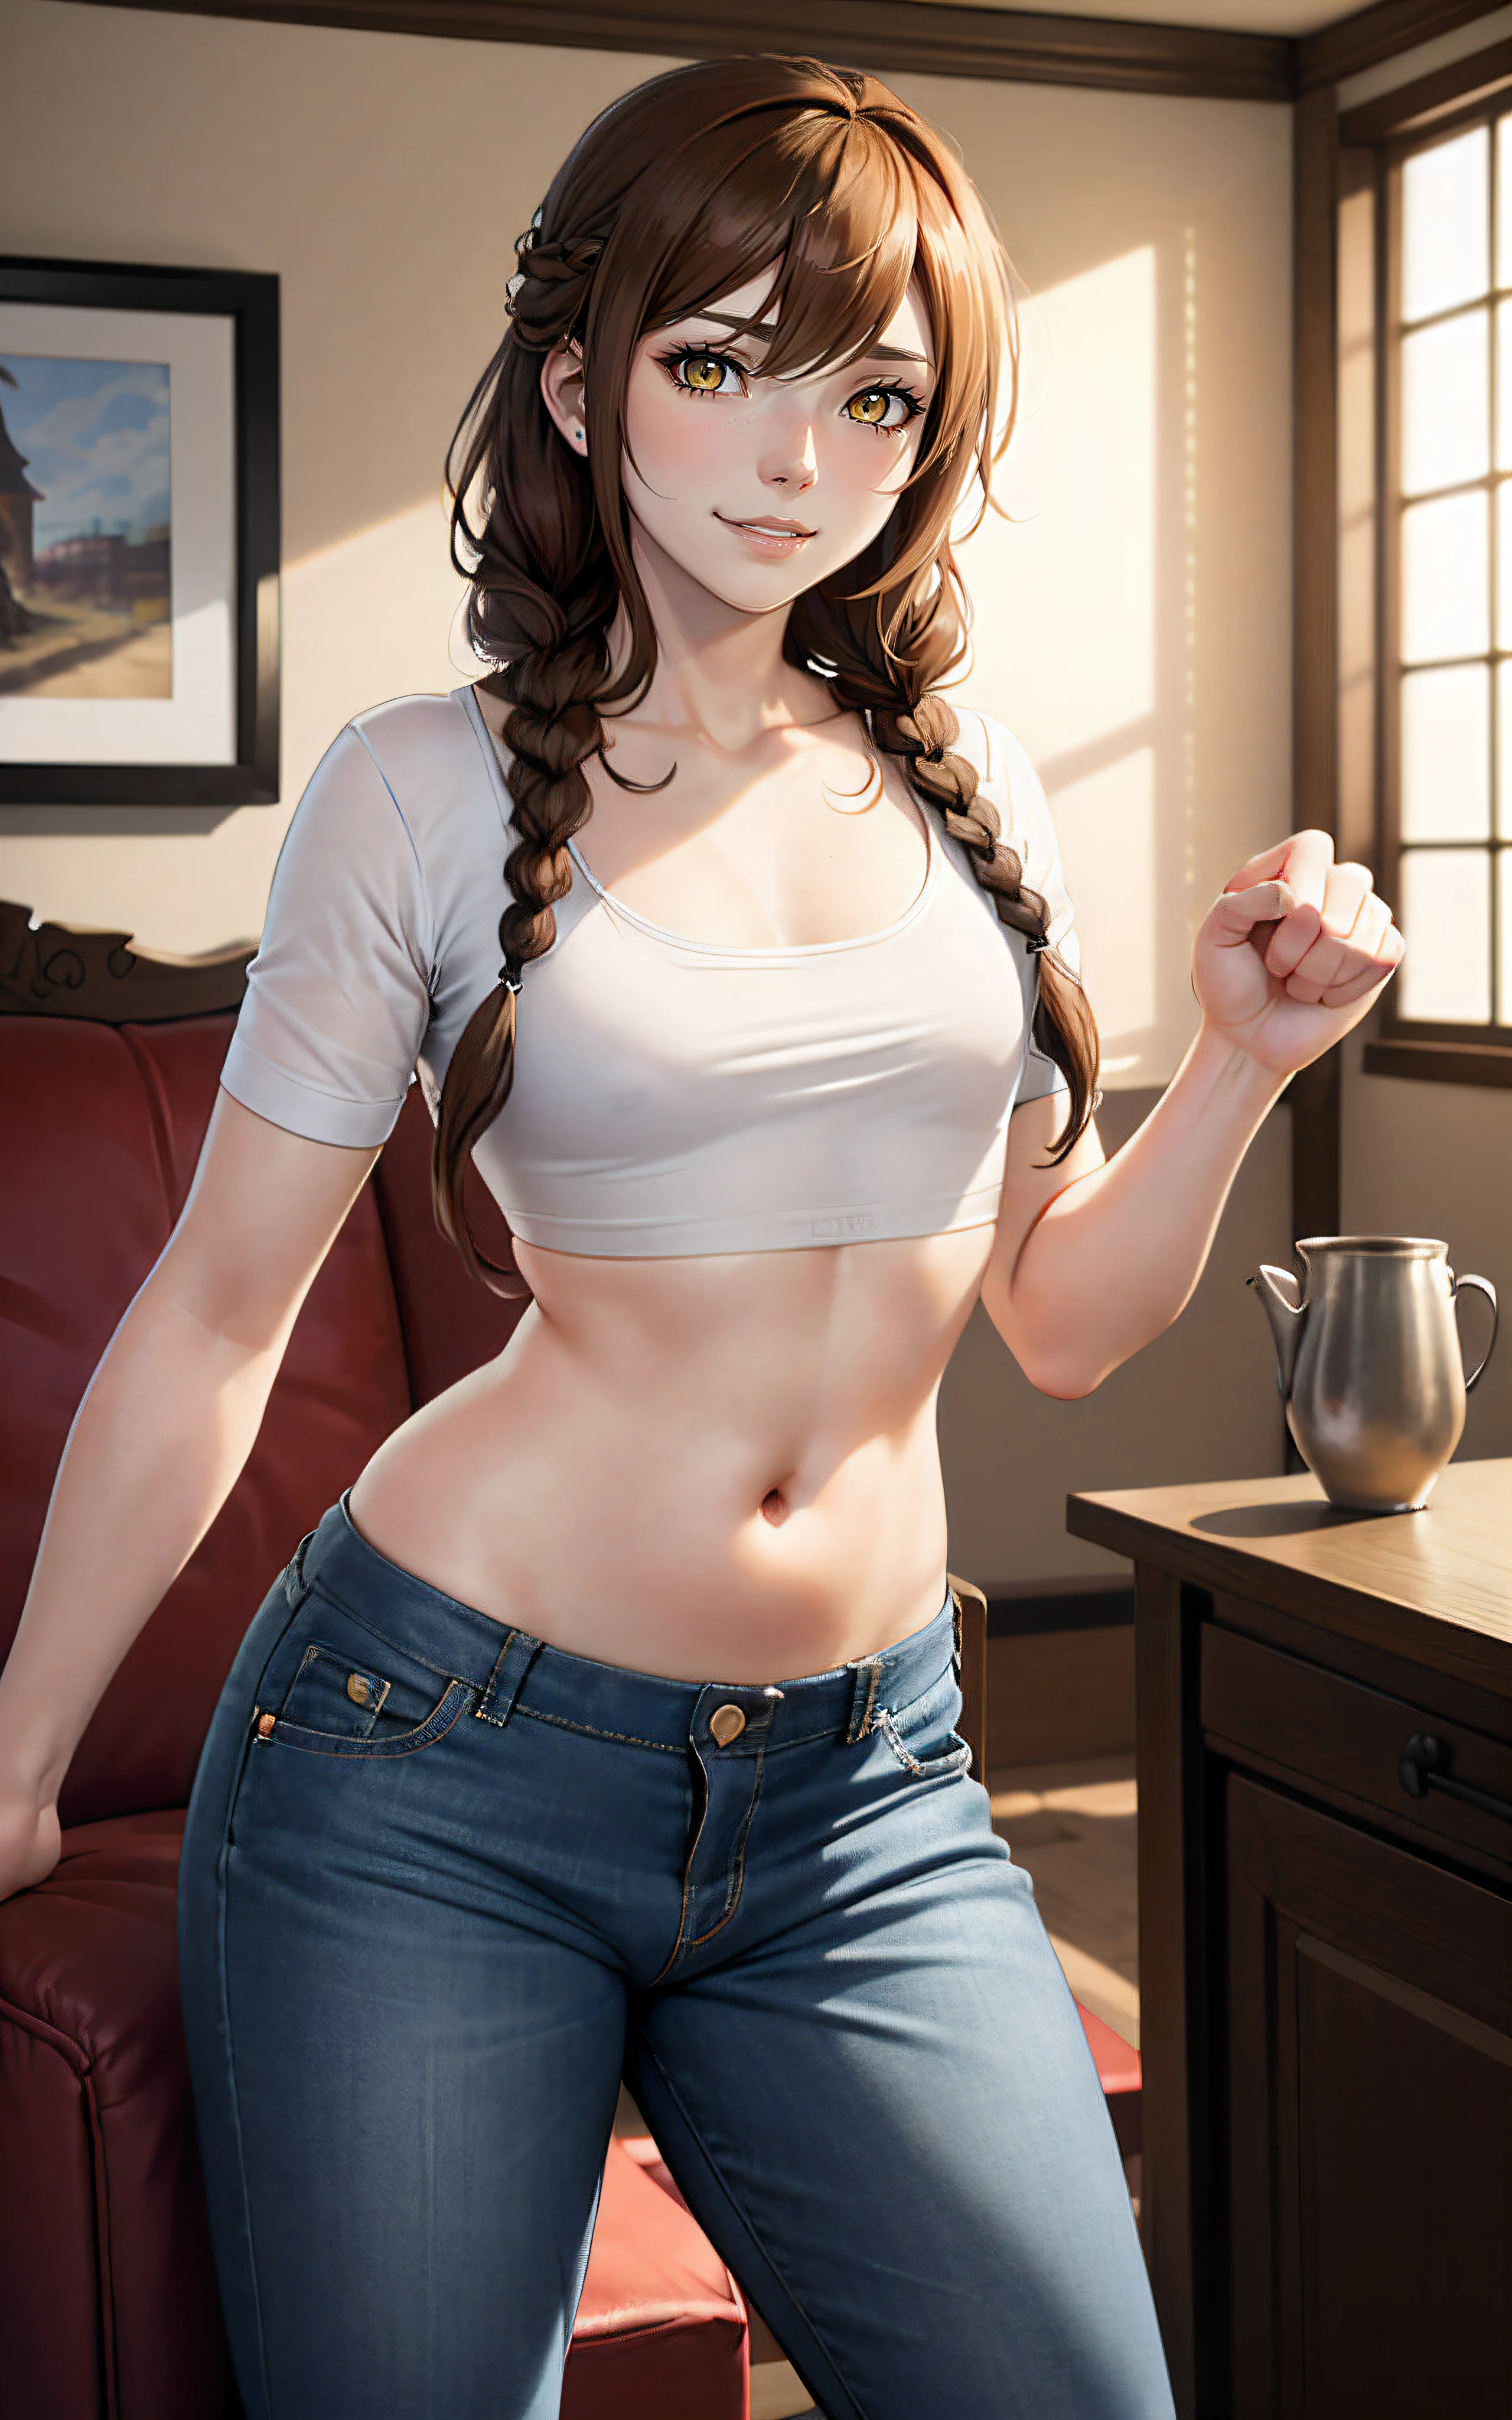 (Urushibara Wounds (Mugshots;Gate)):1.3), ((yellow  eyes, detailded eyes, chestnut hair, braid, long braid, white details on the fringe, ssmile), ((detailded , bulge in the panties, top cut, tummy, )), (((erection, bulge in pants))), (Medieval France, fancy), ((illustration)), (mature man, Masculine feminine, femboy), (((work of art))), (realisitic:0.7), best qualityer,femboy, otoko no ko, Masculine feminine, 1womanl, standing alone, Otoko Maduro no ko, ((flat-chested)), (((Action pose with interaction and leaning on anything+object+in something+leaning against))) in an apartment with furniture, cama de casal, window, desk with computer and TV , 16K, ultra HD, maximum quality, Maximum resolution, ultra realisitic, ((ultra detailded):1), ((perfect_Hands, perfect_Fingers))